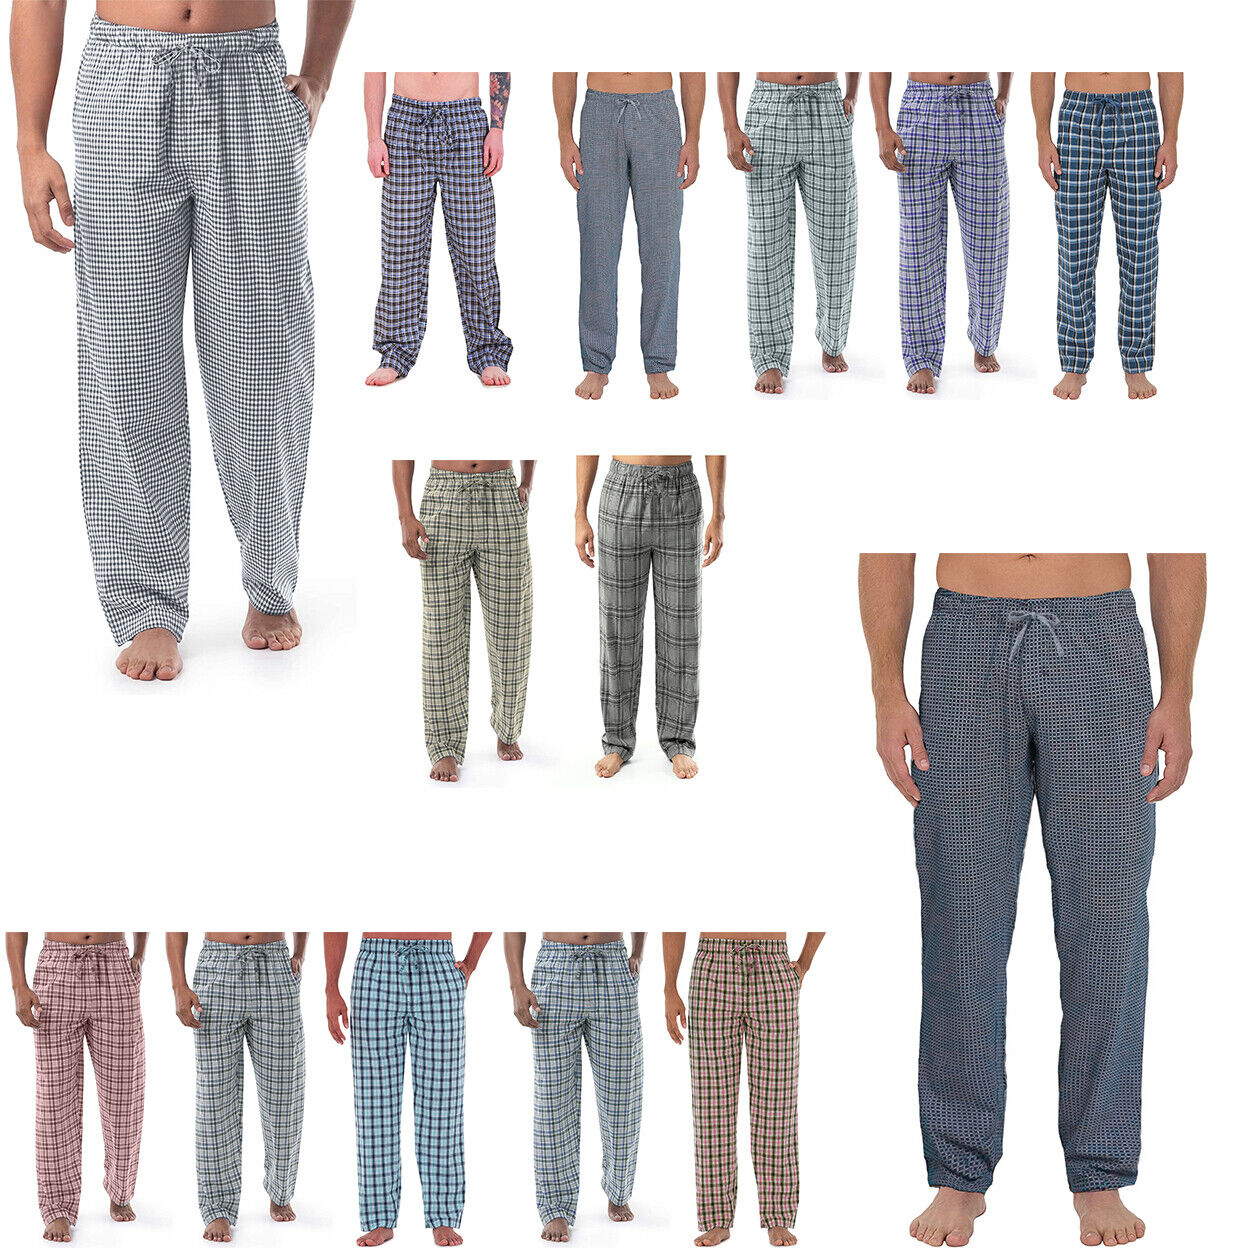 Multi-Pack: Men's Ultra-Soft Solid & Plaid Cotton Jersey Knit Comfy Sleep Lounge Pajama Pants - 3-pack Plaid, X-large